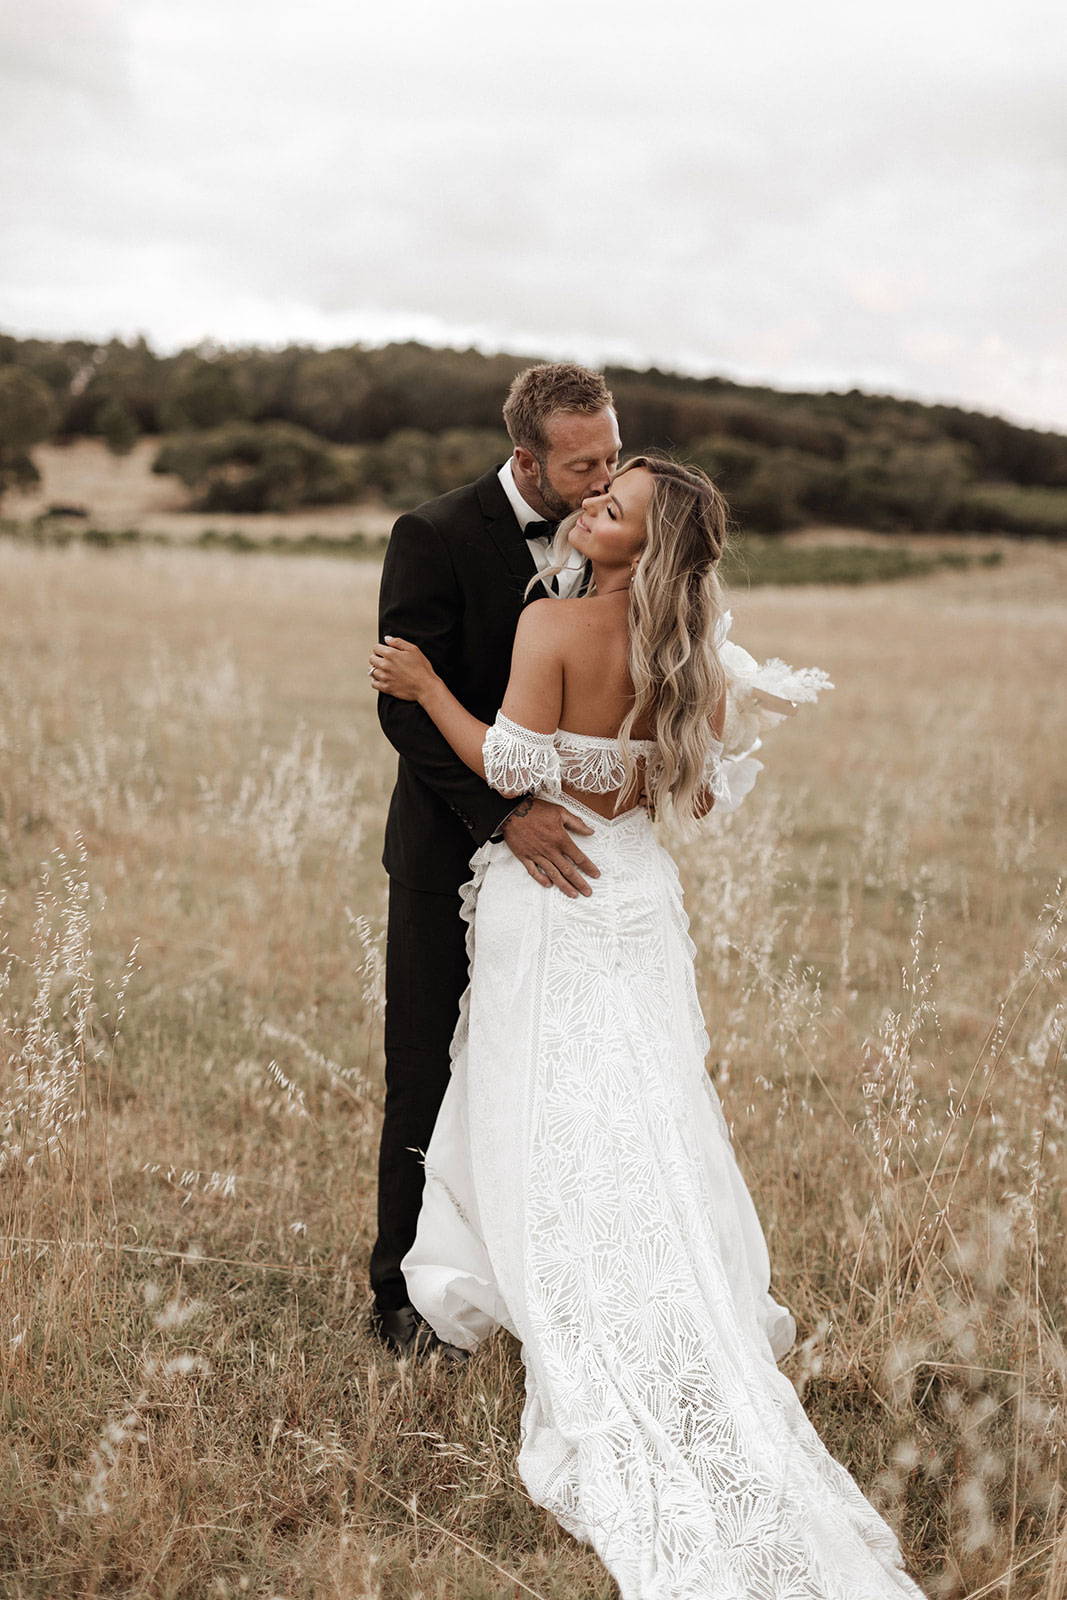 Bride and groom in country field